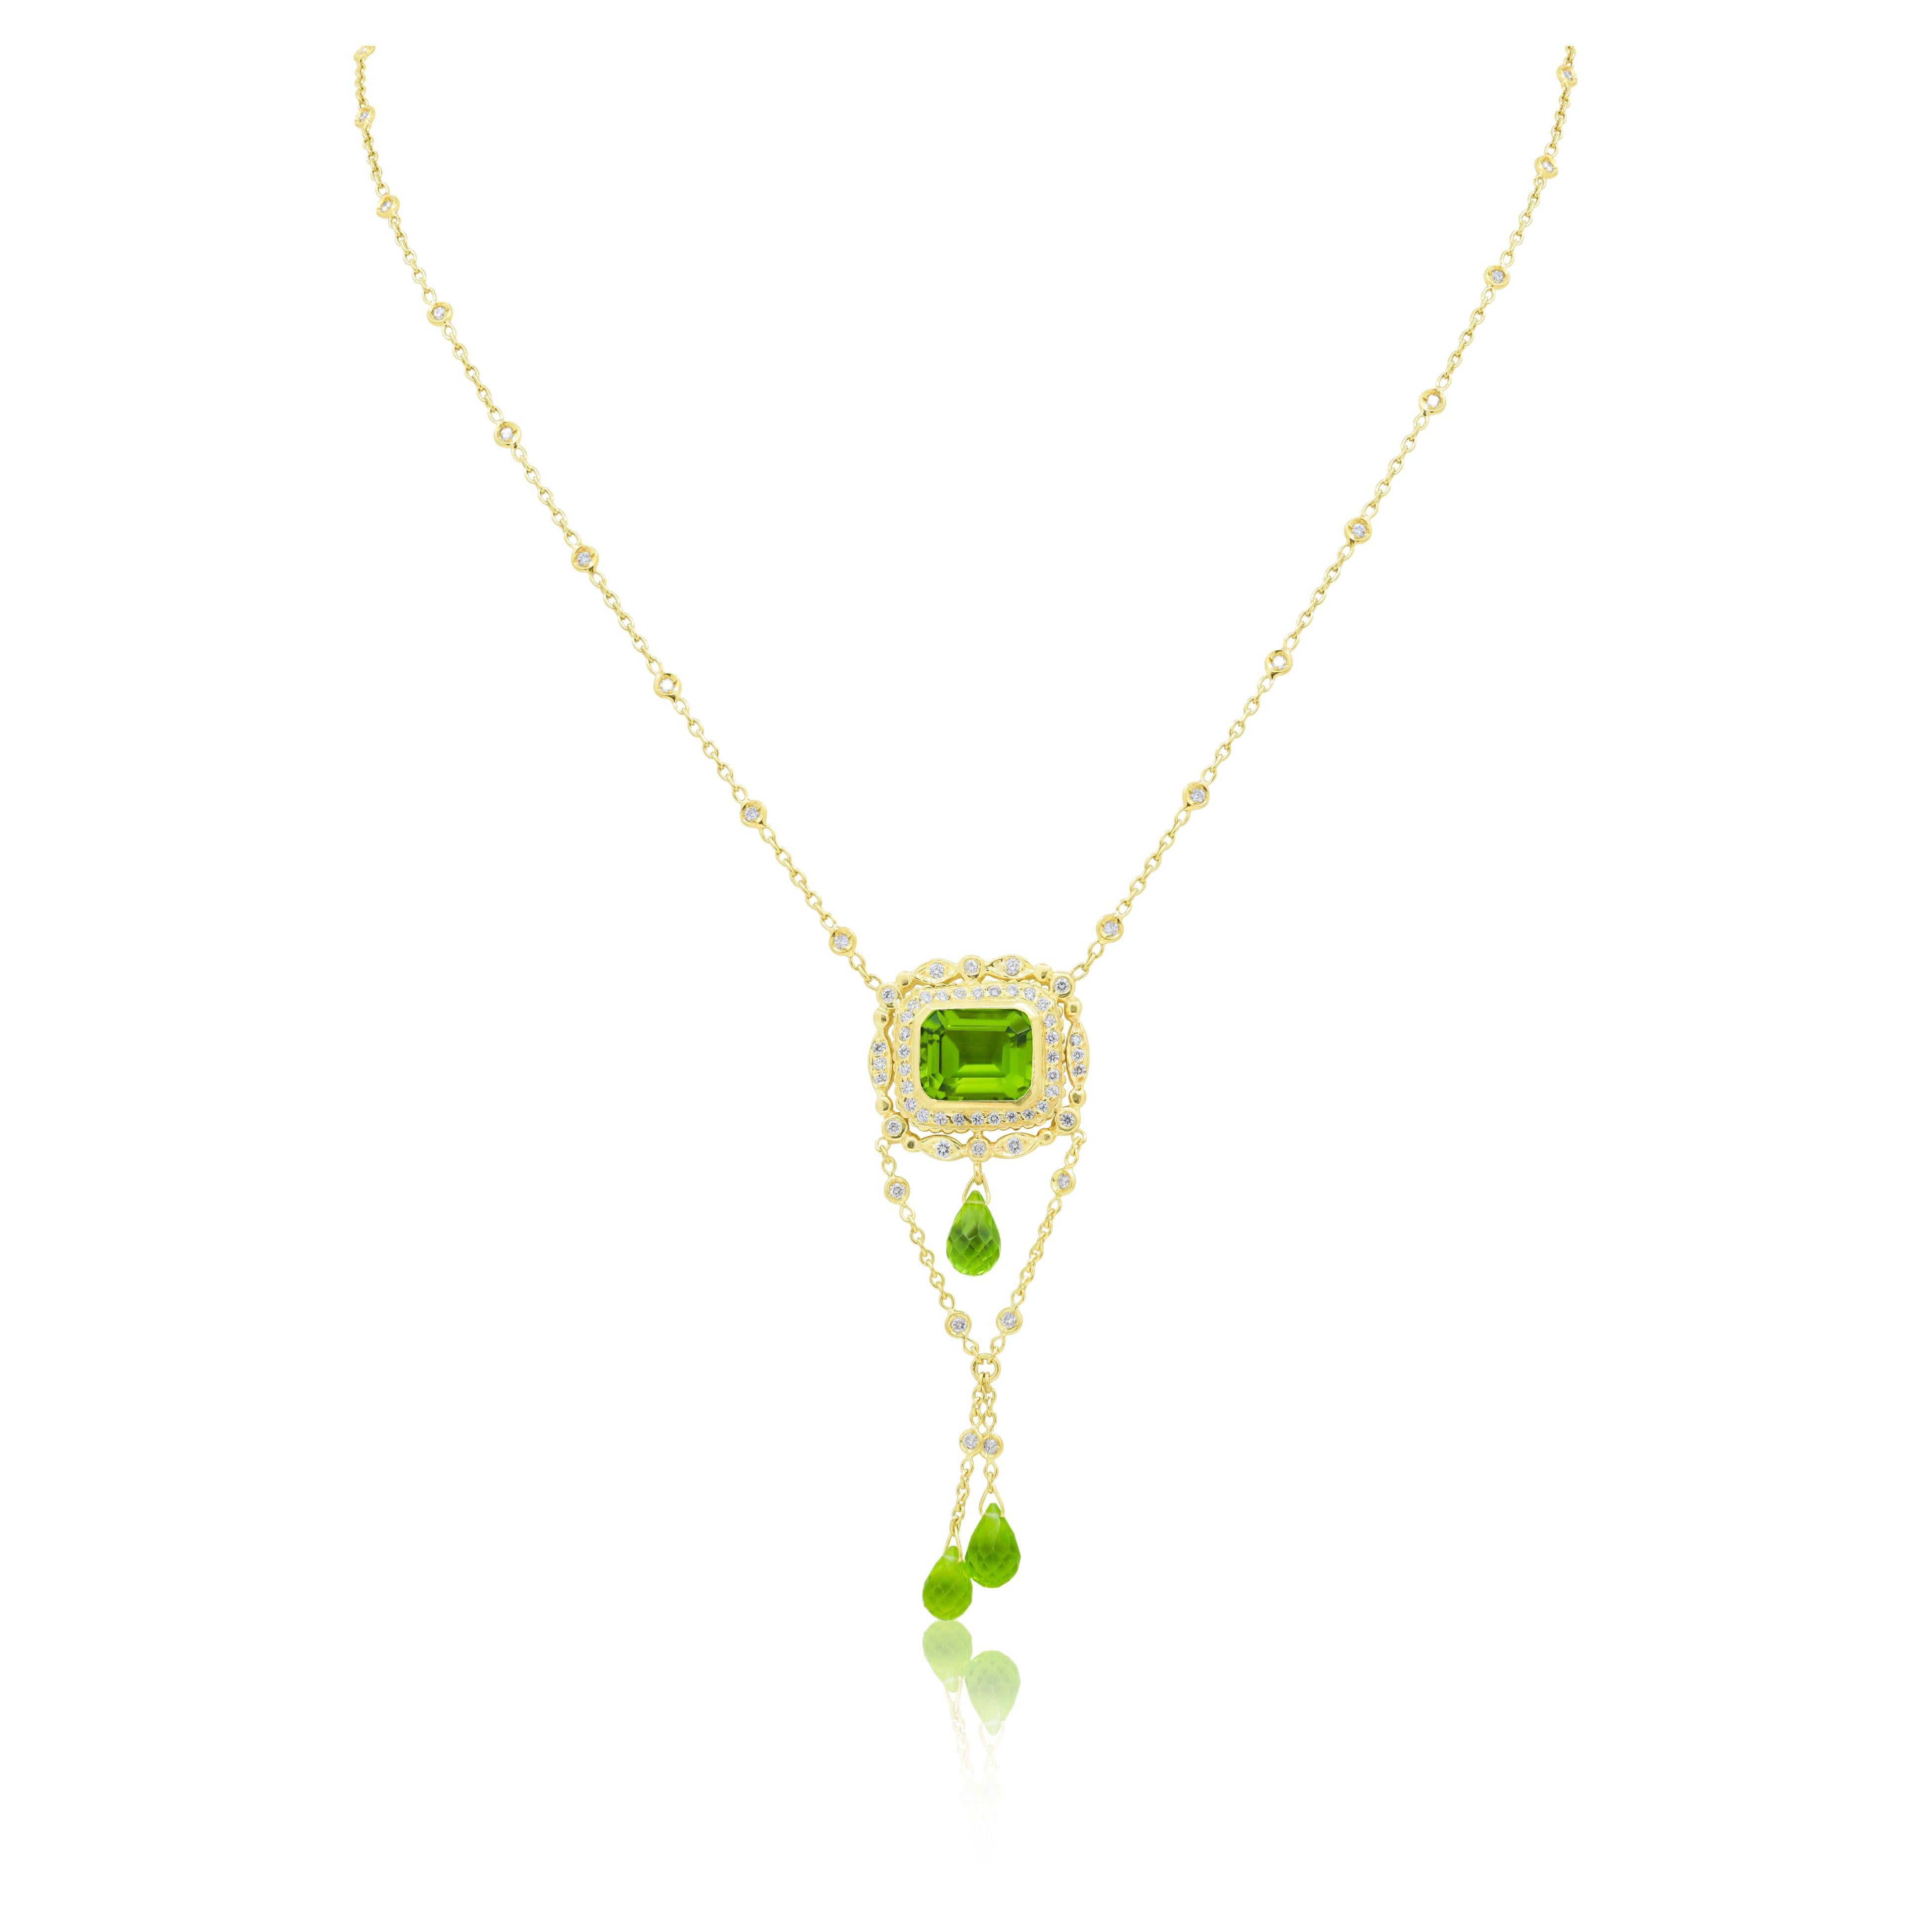 18kt yellow gold diamond pendant with emerald cut peridot 8.00ct and 1.30cts of diamonds with diamonds by the yard chain all one piece with 3 dangling briolette’s

Diana M. is a leading supplier of top-quality fine jewelry for over 35 years.
Diana M